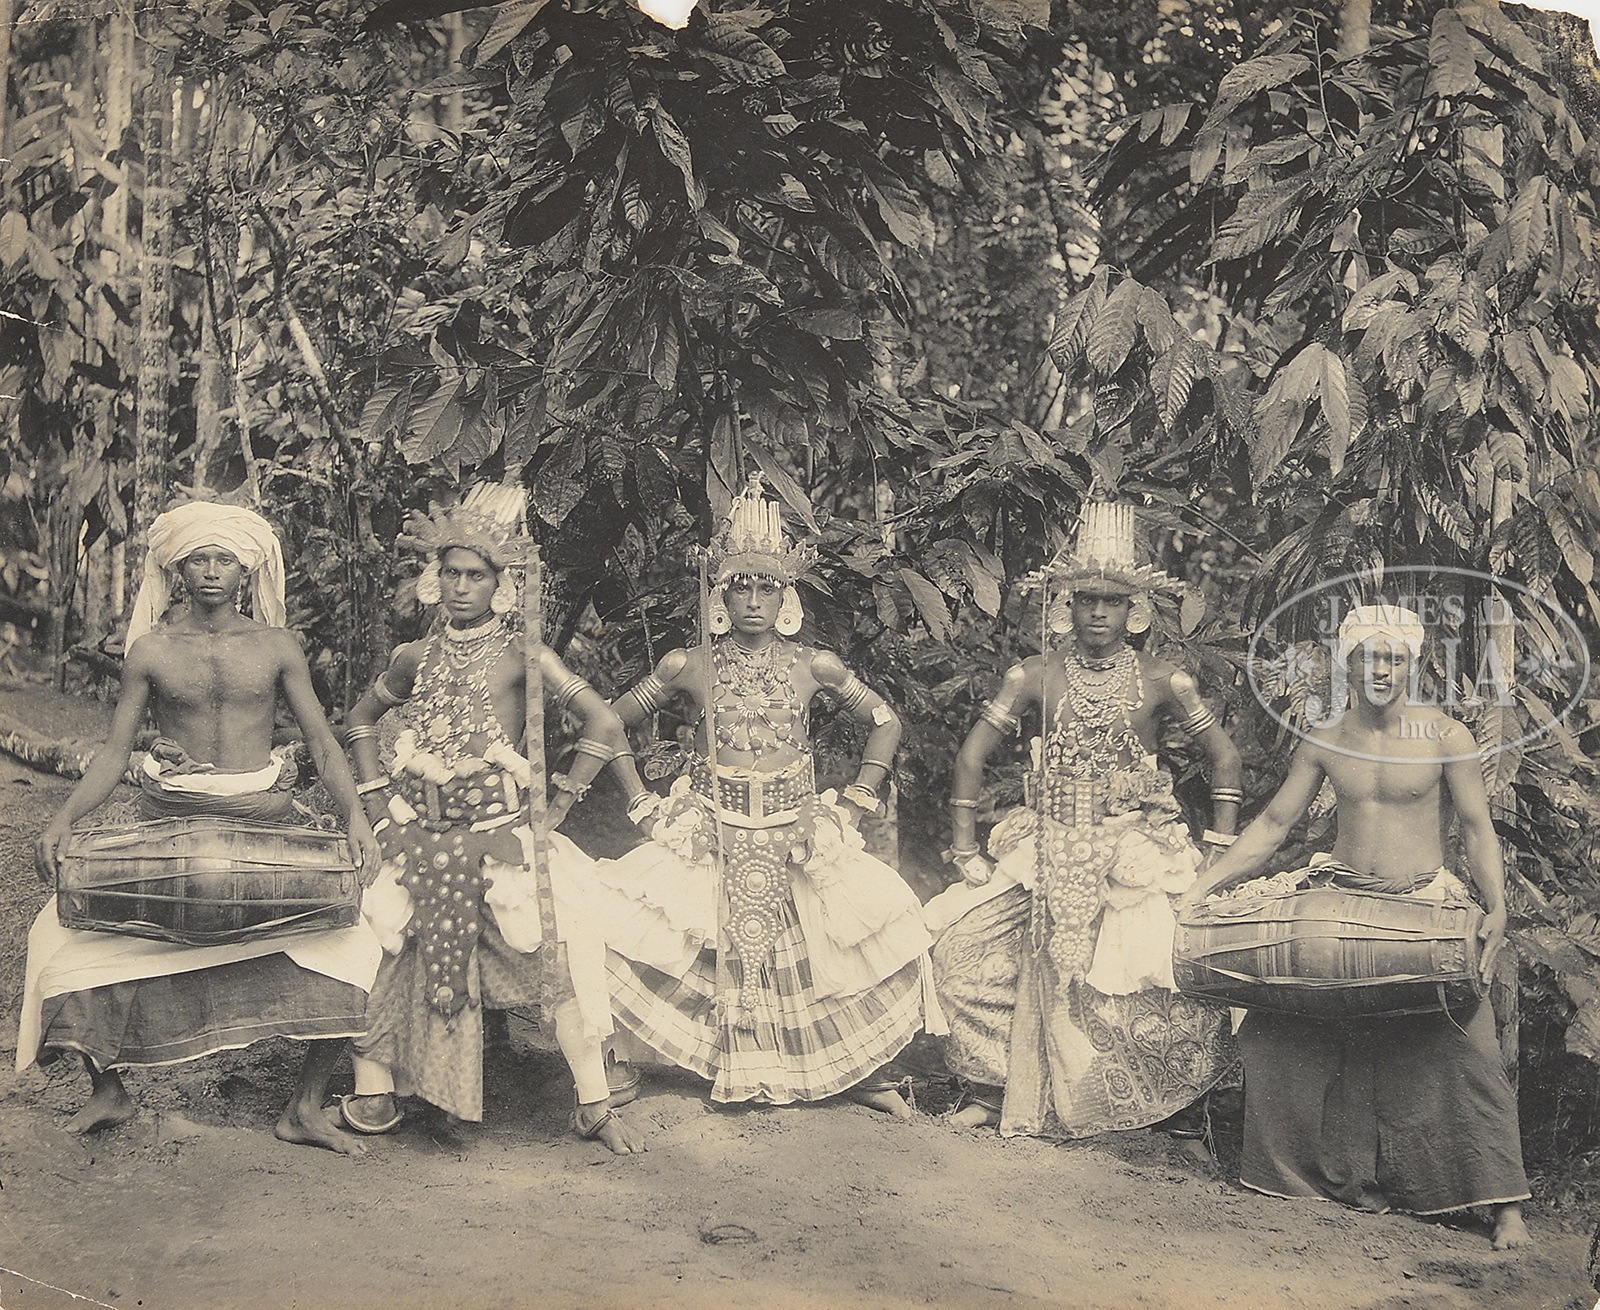 EXTRAORDINARY & MASSIVE LIFE LONG COLLECTION OF RARE ASIAN PHOTOGRAPHS AMASSED BY DR. HELGA WALL- - Image 66 of 222